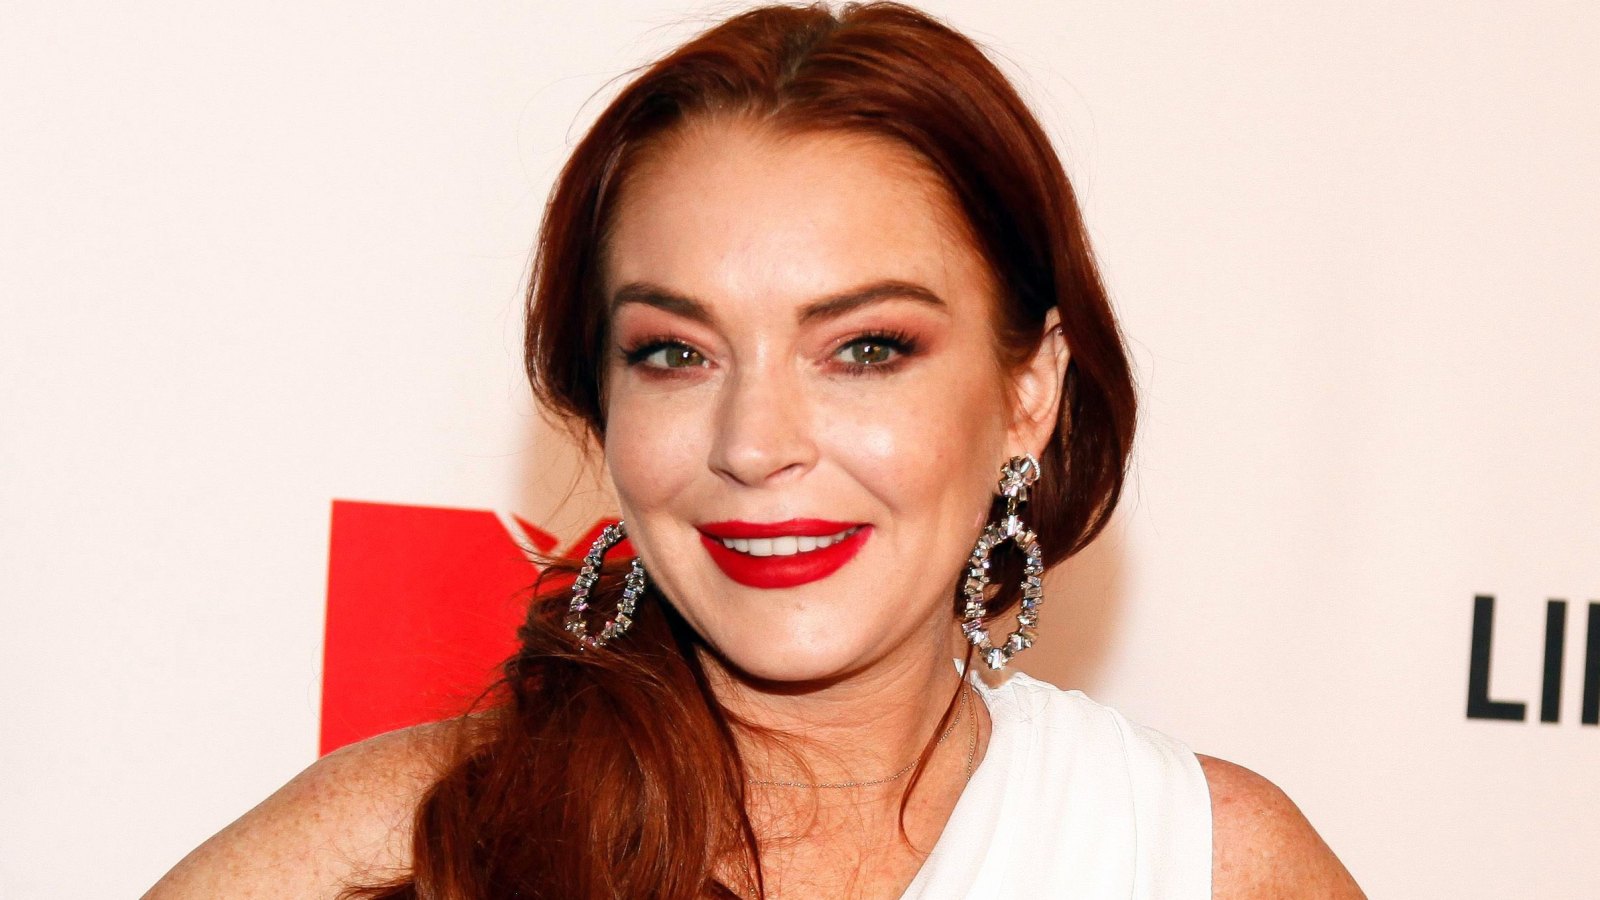 Lindsay Lohan Releases Music Video for 1st Single in a Decade, 'Xanax,' About Her Social Anxiety